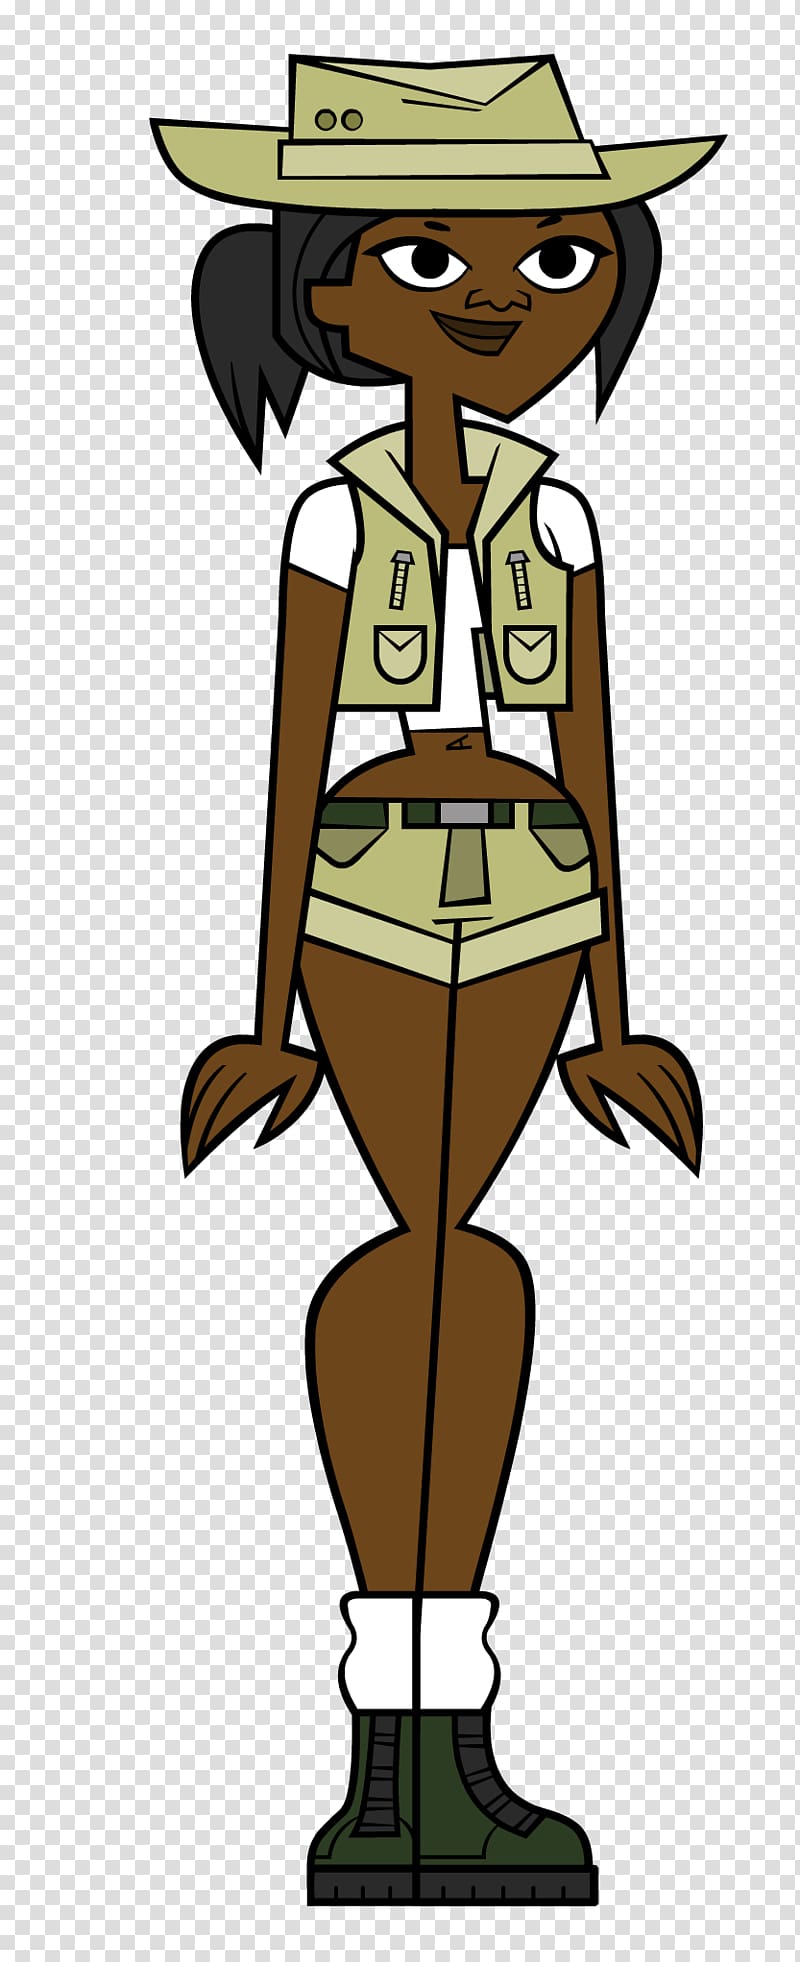 Total Drama Island Wikia Television show Character, jasmin transparent background PNG clipart